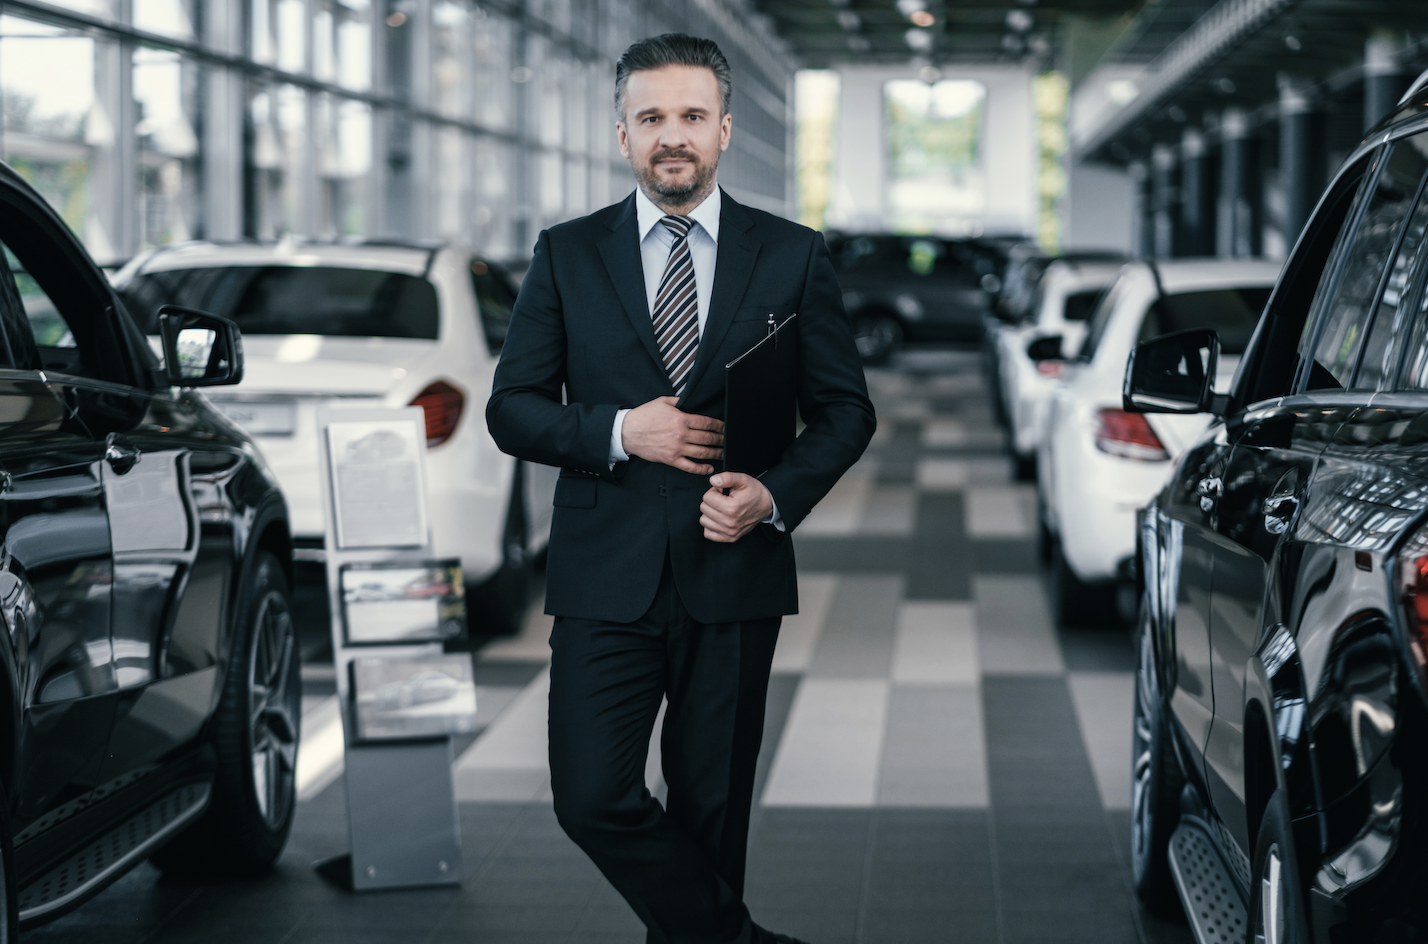 5 Auto Dealer SMS Tricks to Help You Sell More Cars